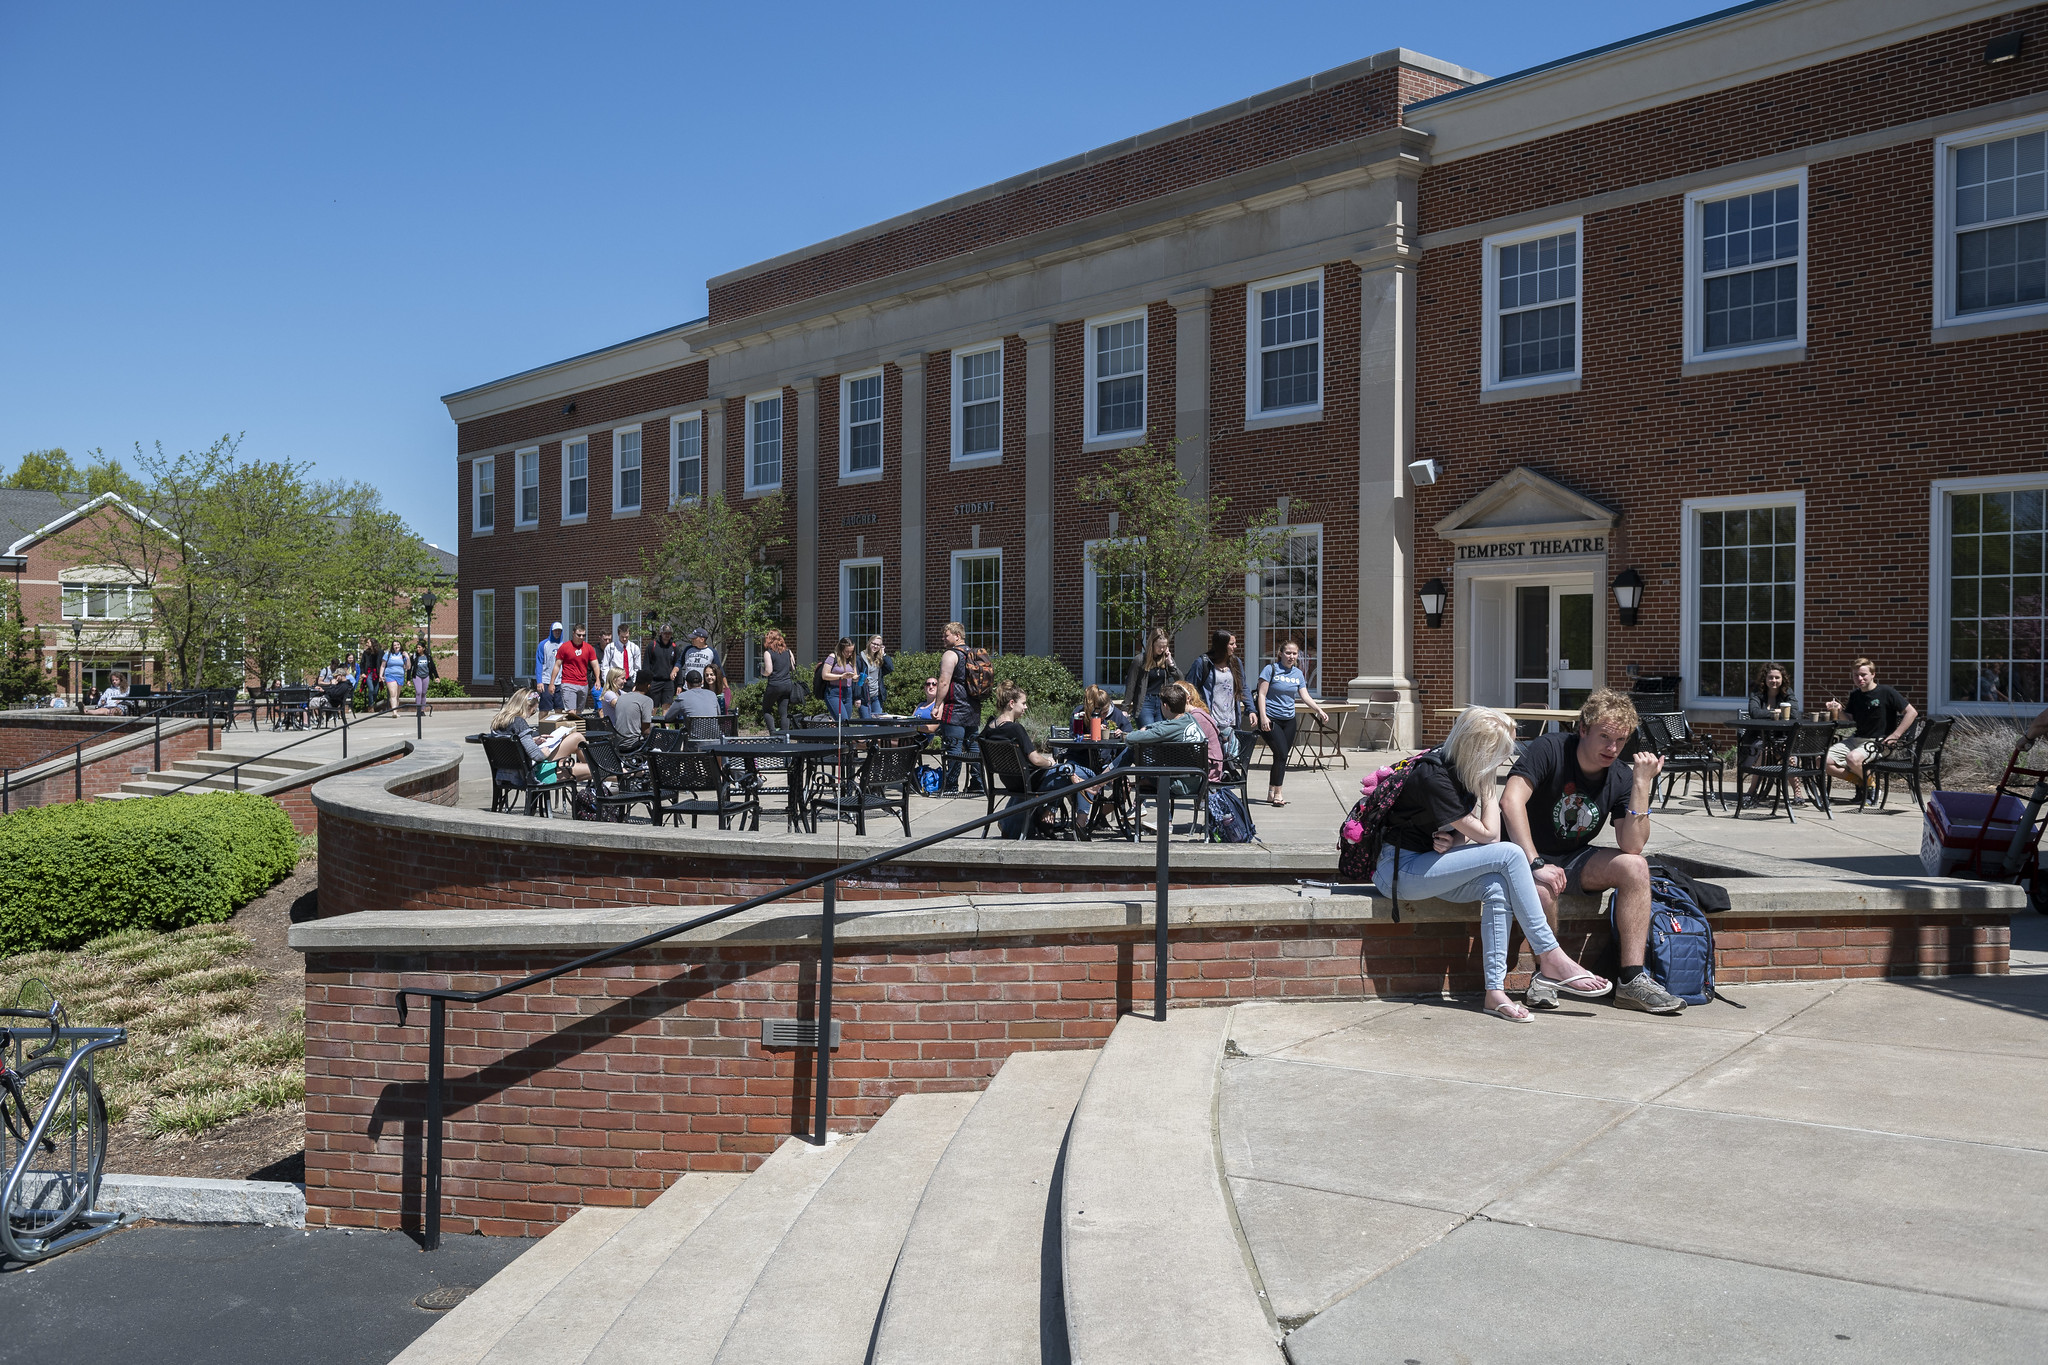 Elizabethtown College Named to The Princeton Review’s “Best in the Northeast” List